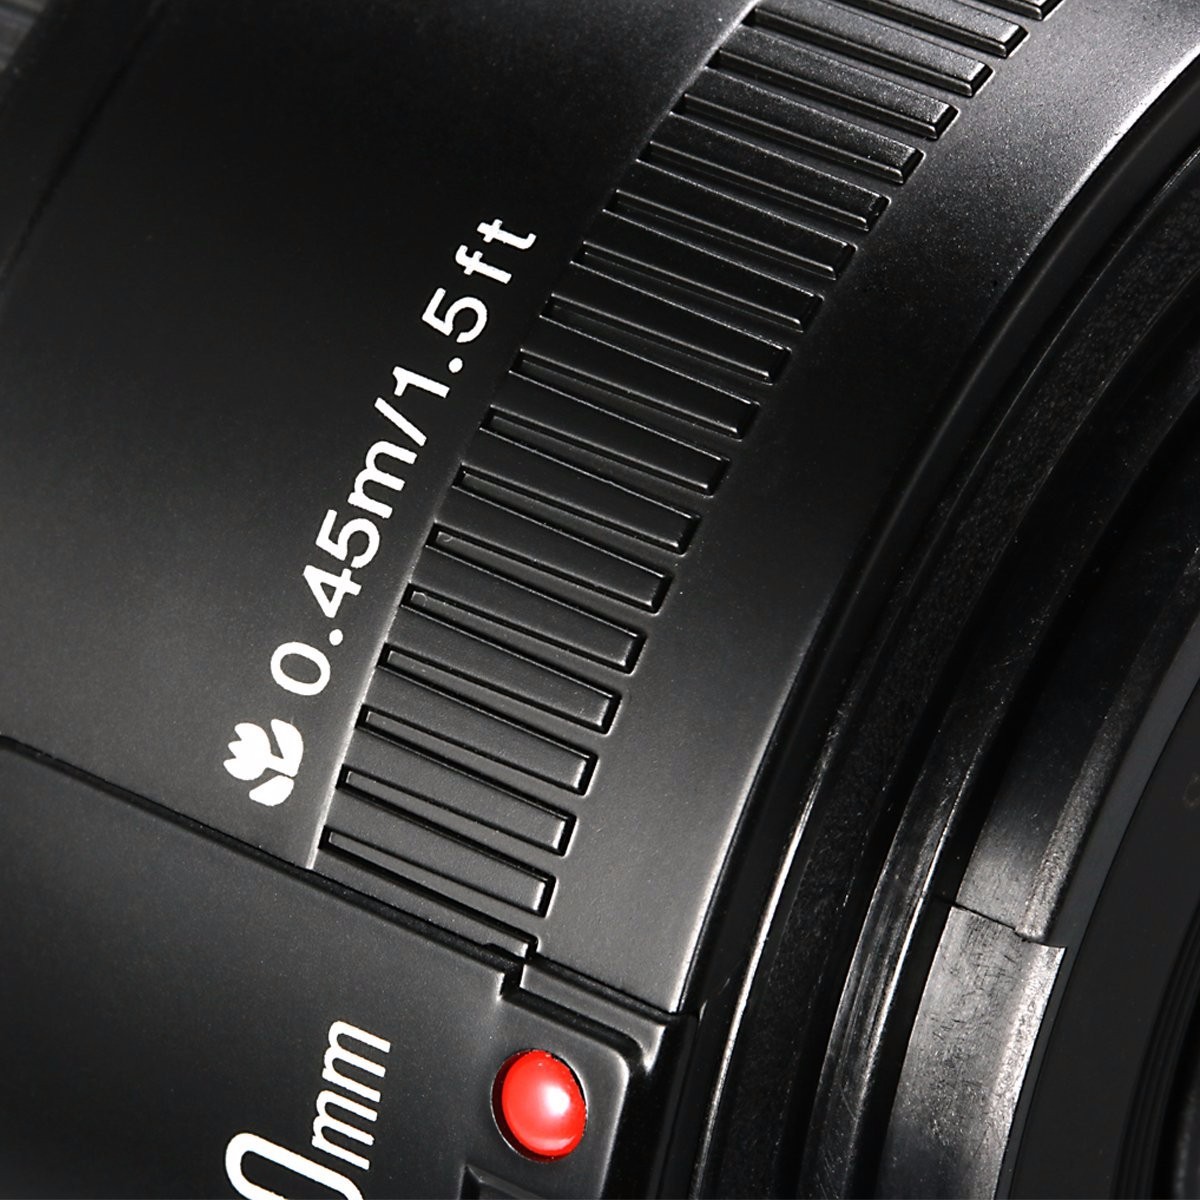 YONGNUO  50mm f/1.8  Lens for Canon